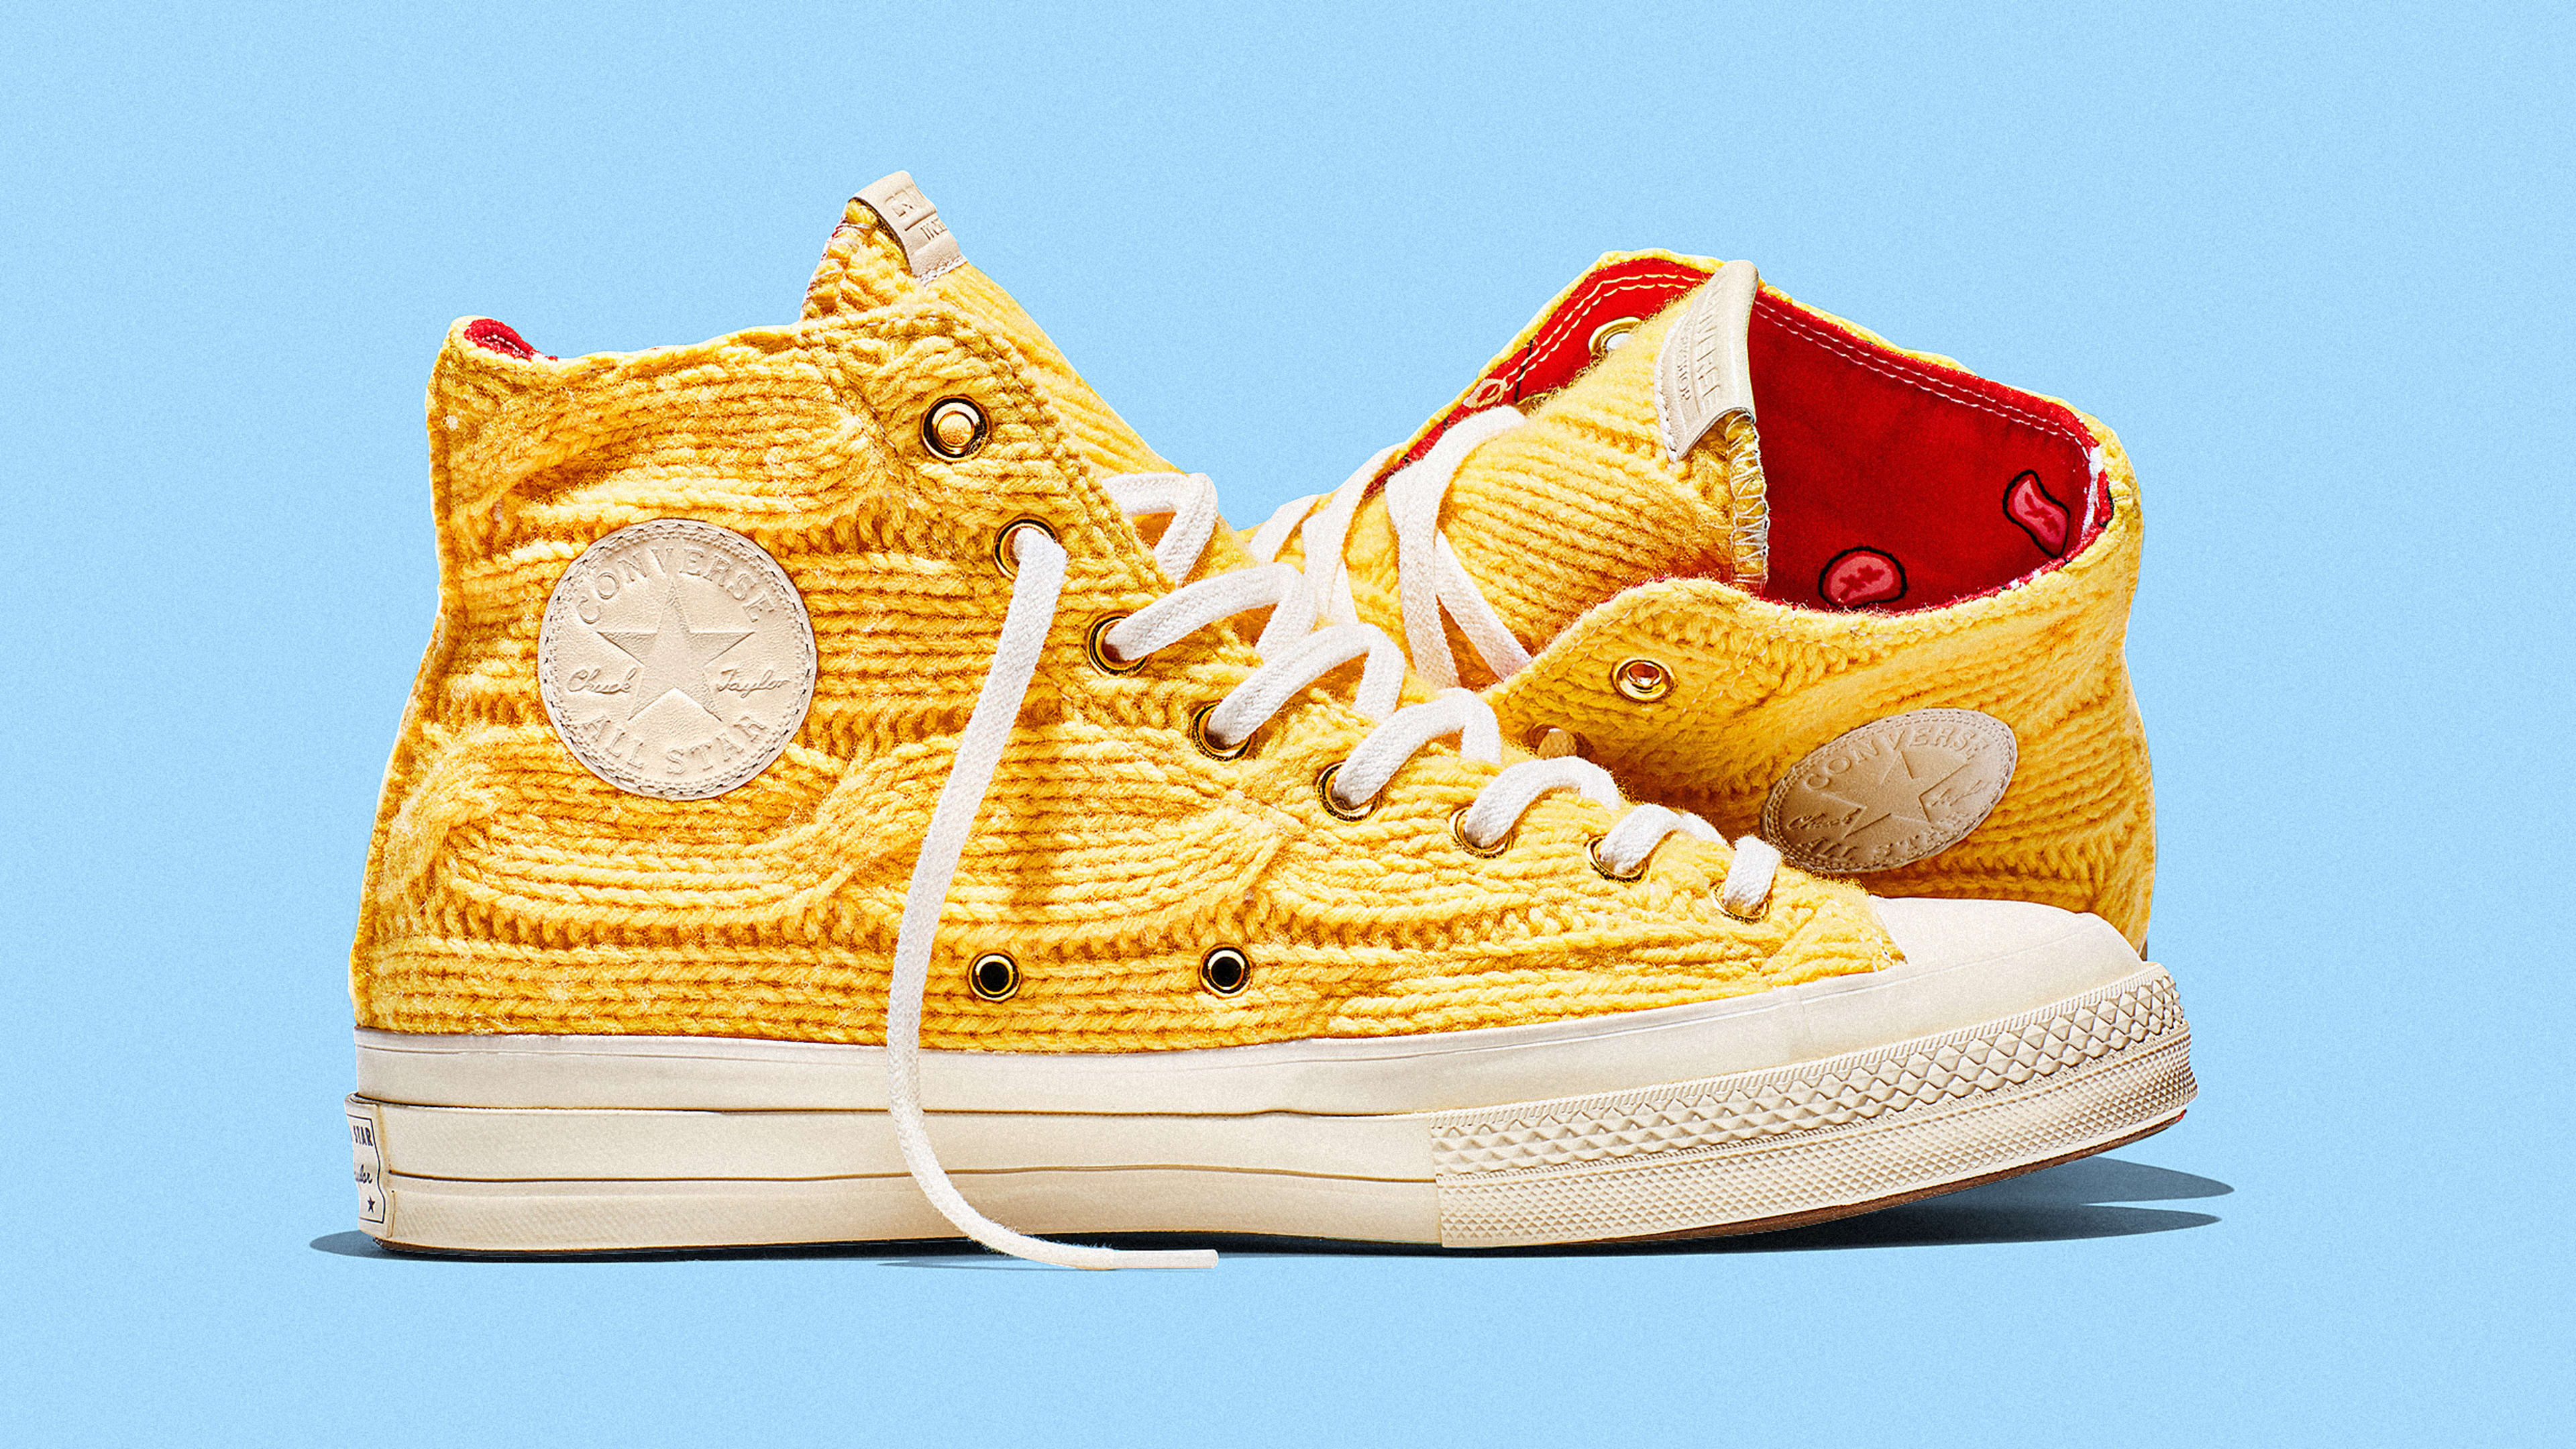 Converse is quietly reinventing one of America’s most iconic sneakers